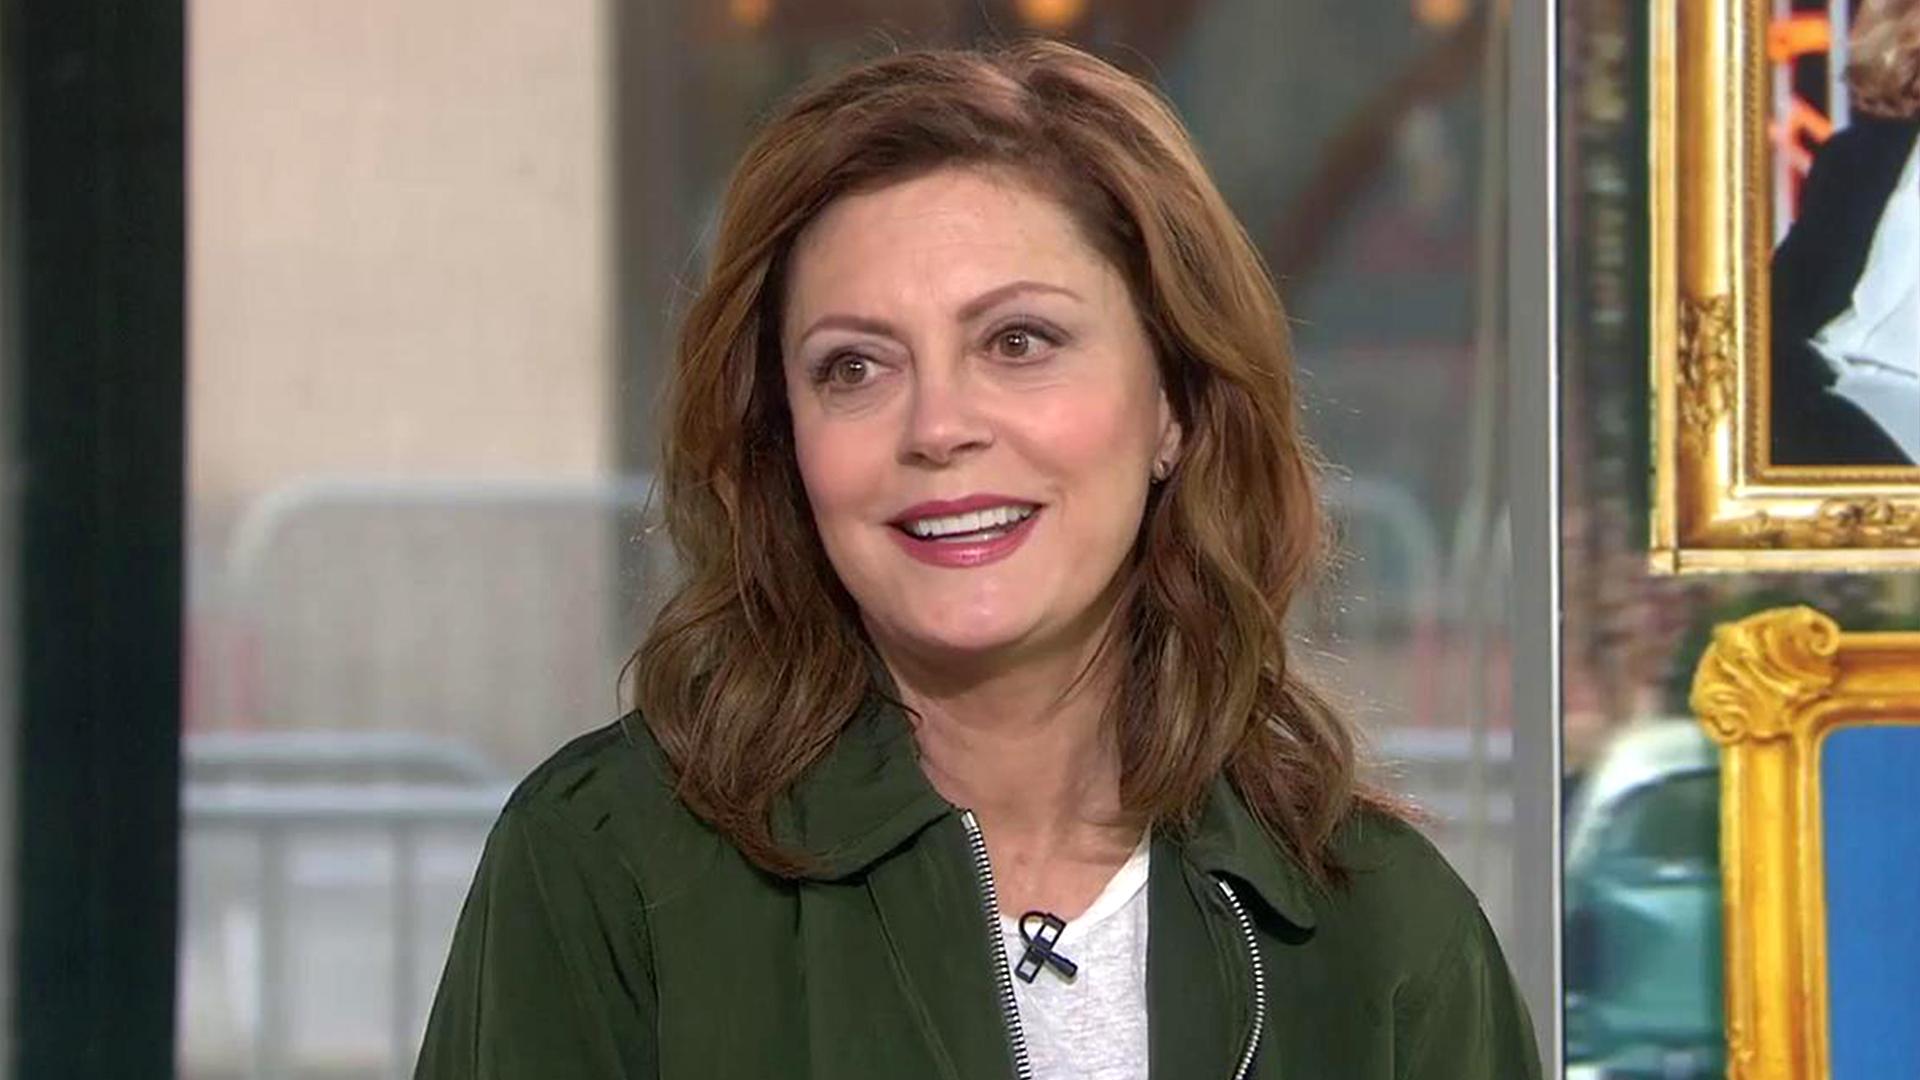 Susan Sarandon on roles for older women: ‘There’s a lack of imagination’